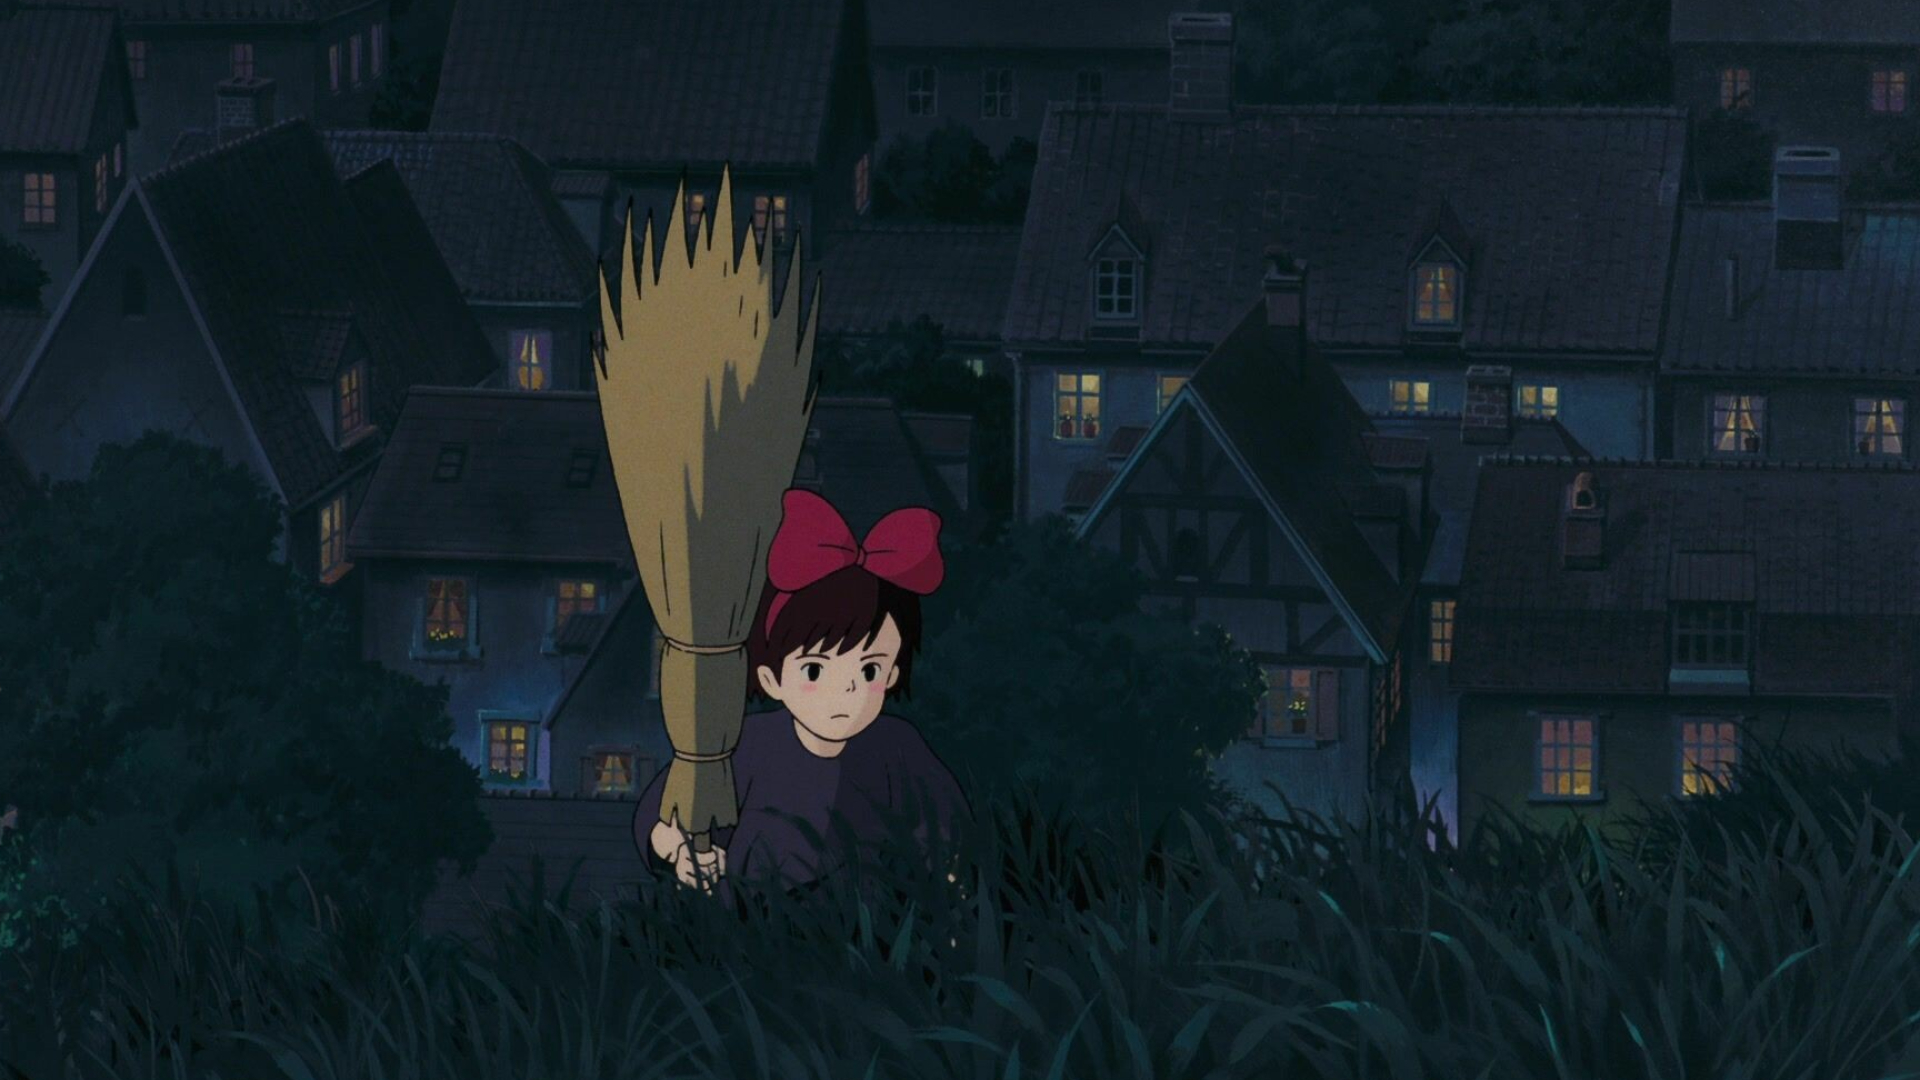 Kiki's Delivery Service: Studio Ghibli, The film was released on home video in the U.S. and Canada on September 15, 1998. 1920x1080 Full HD Background.